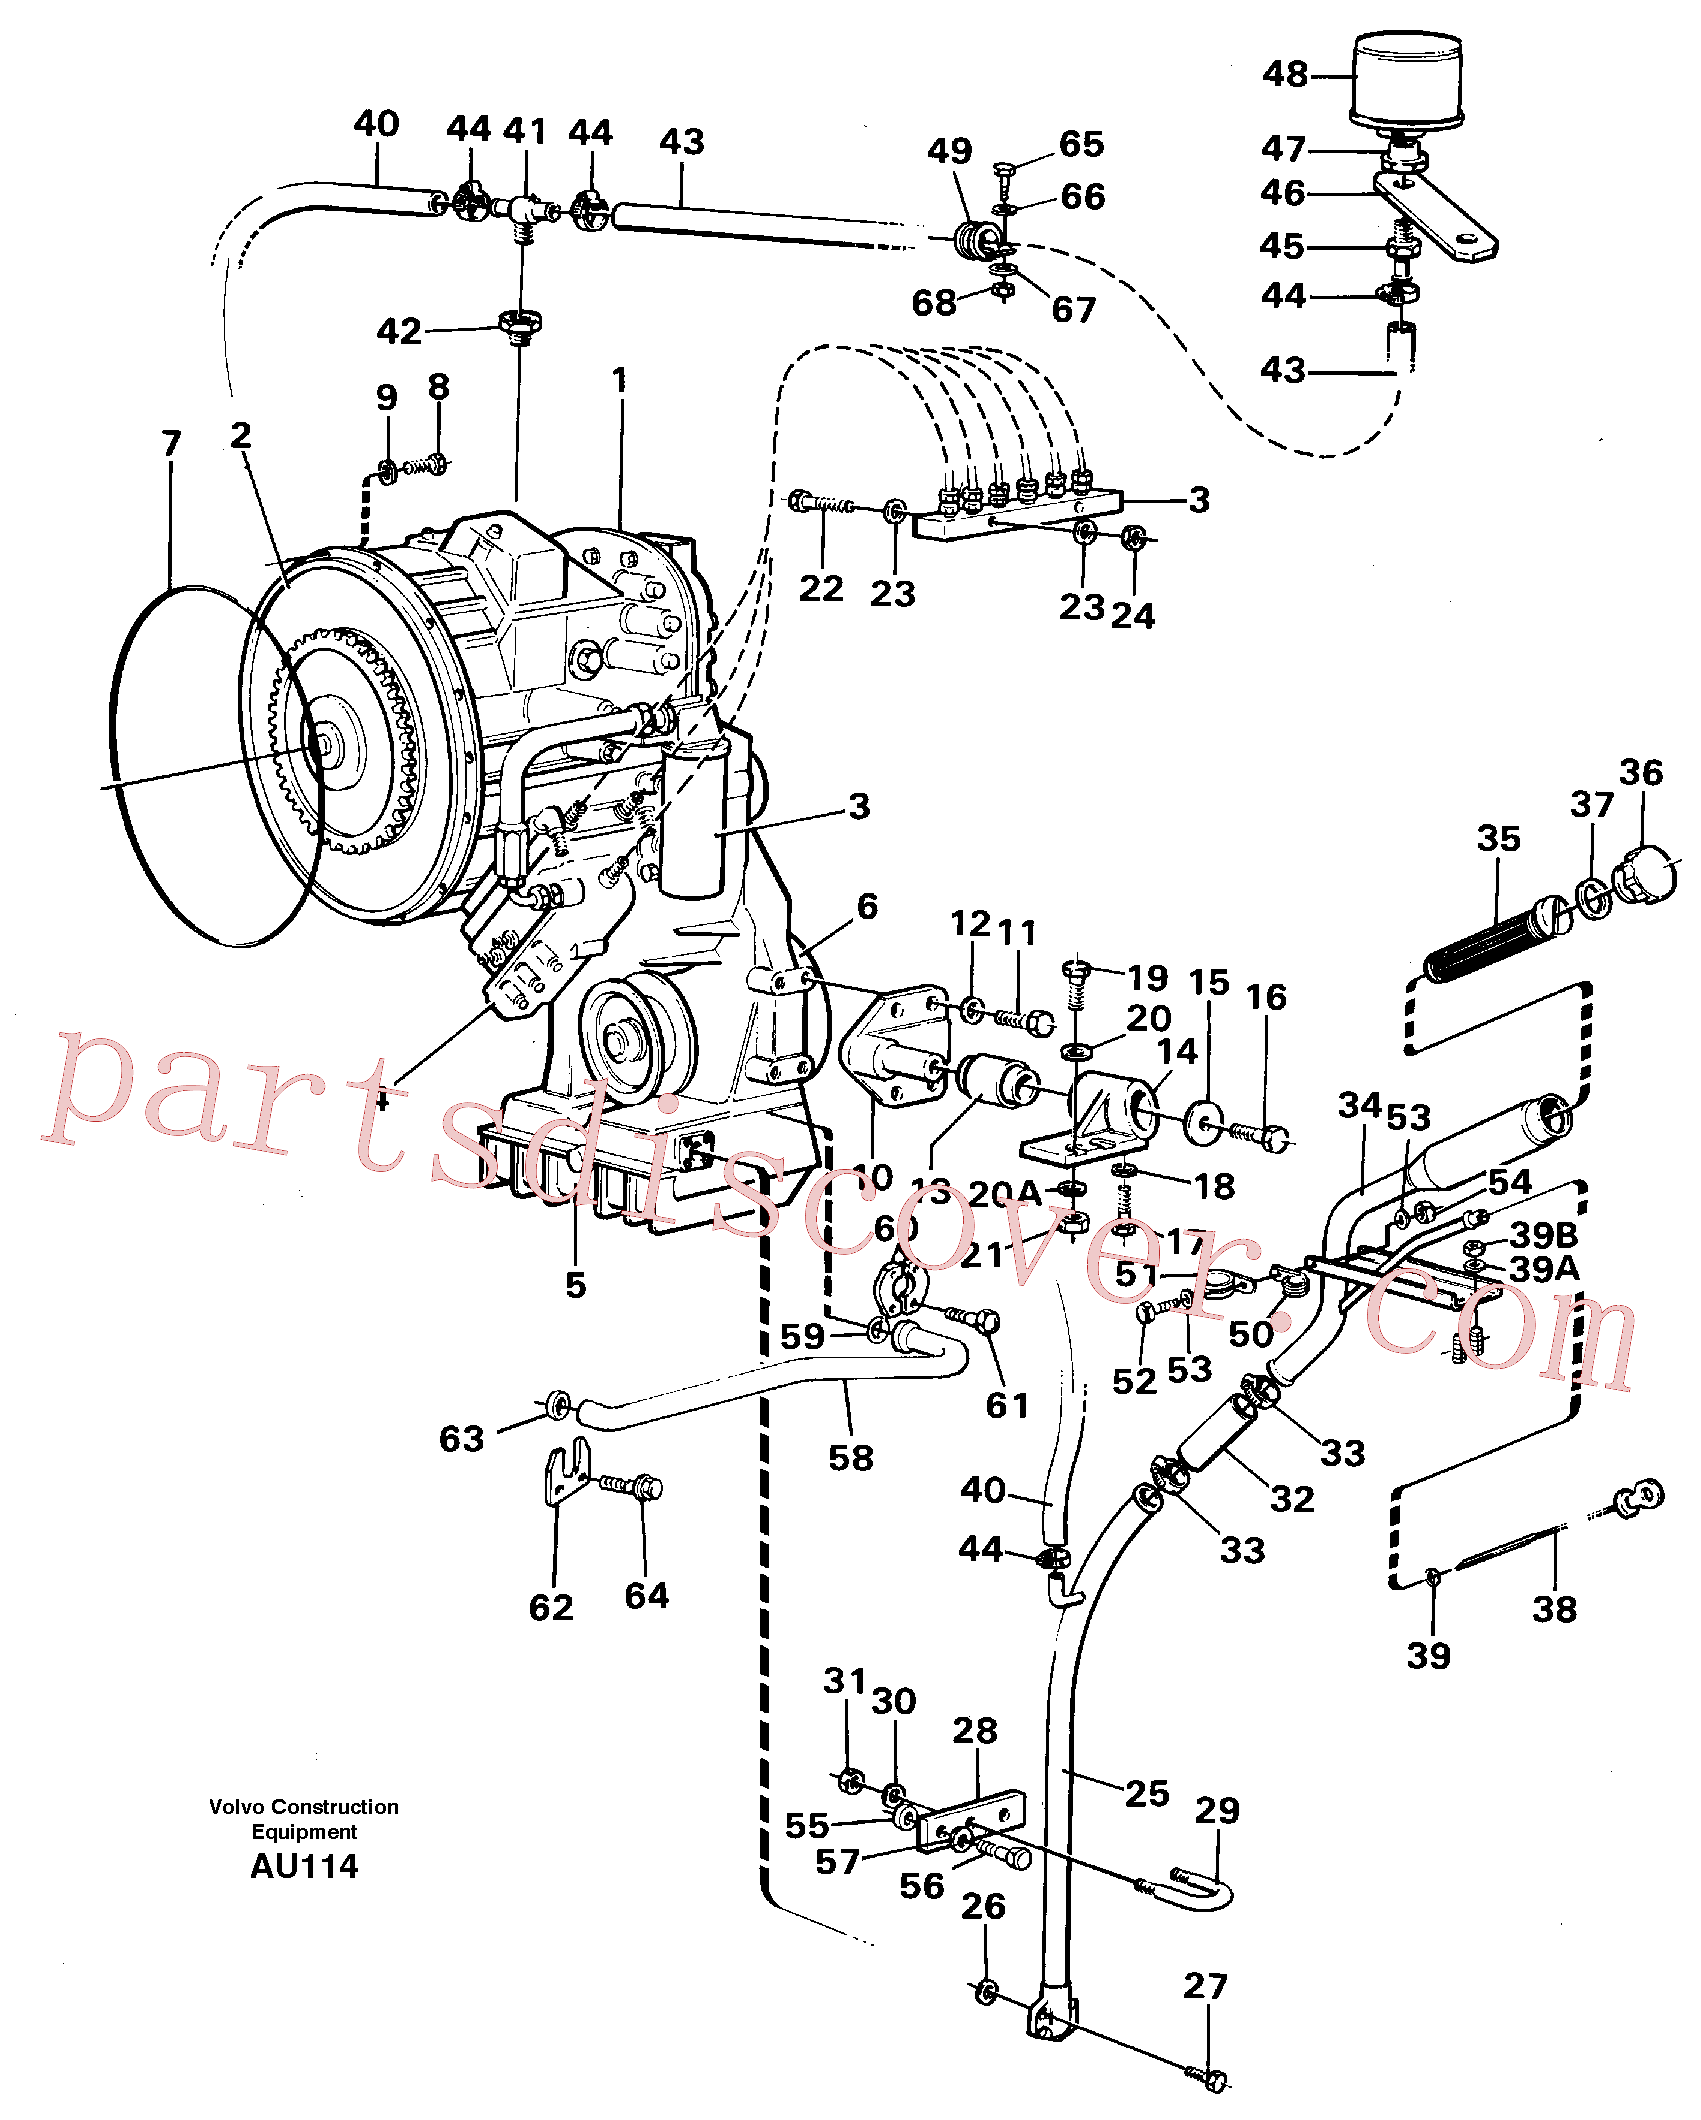 VOE4850621 for Volvo Hydraulic transmission with fitting parts(AU114 assembly)